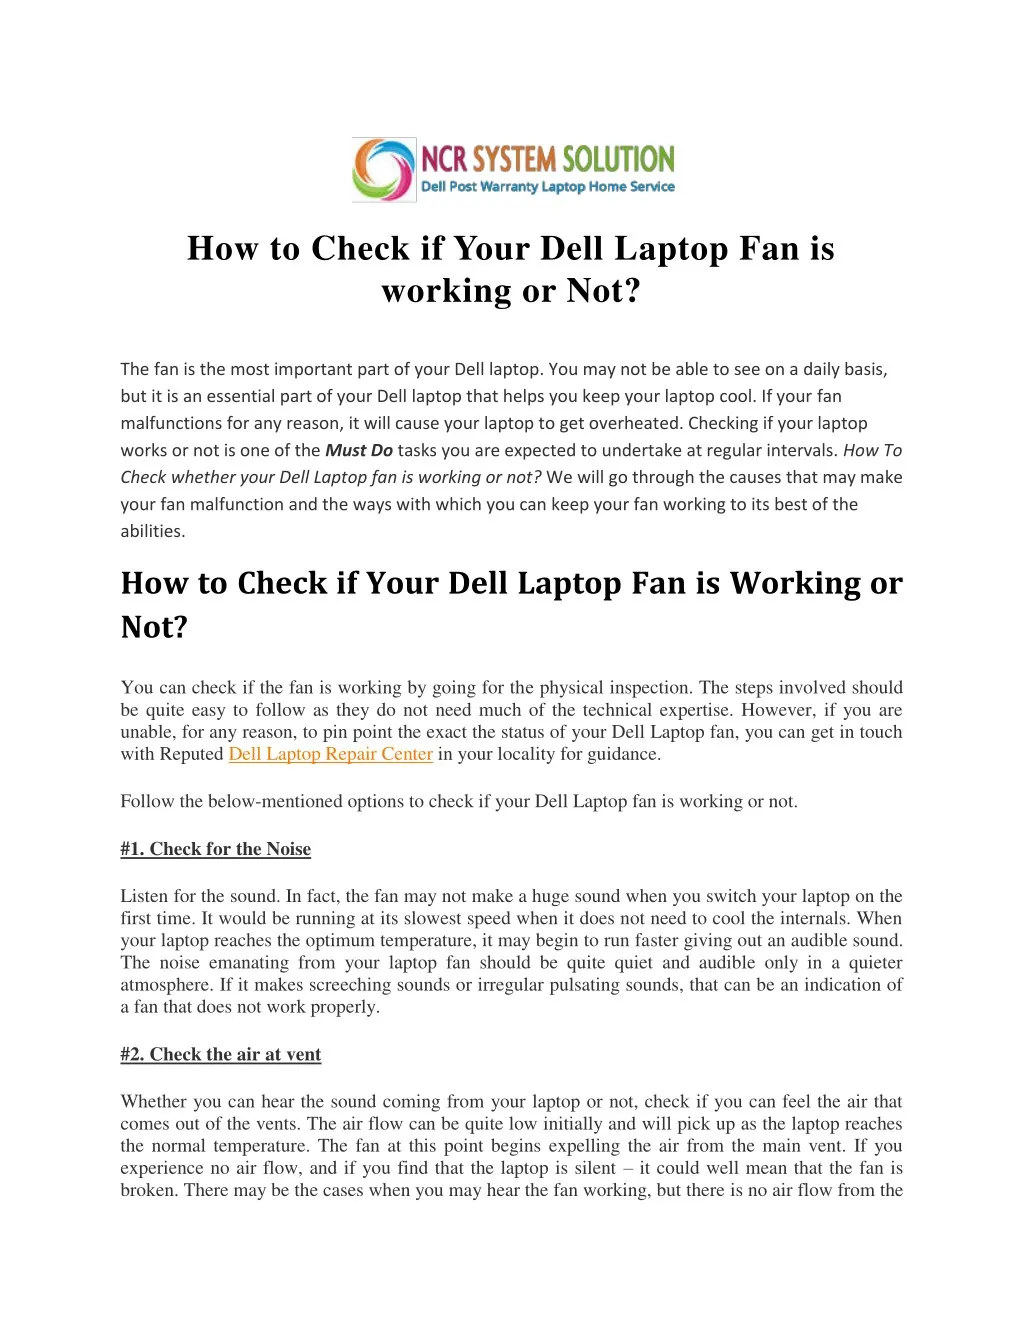 how to check if your dell laptop fan is working